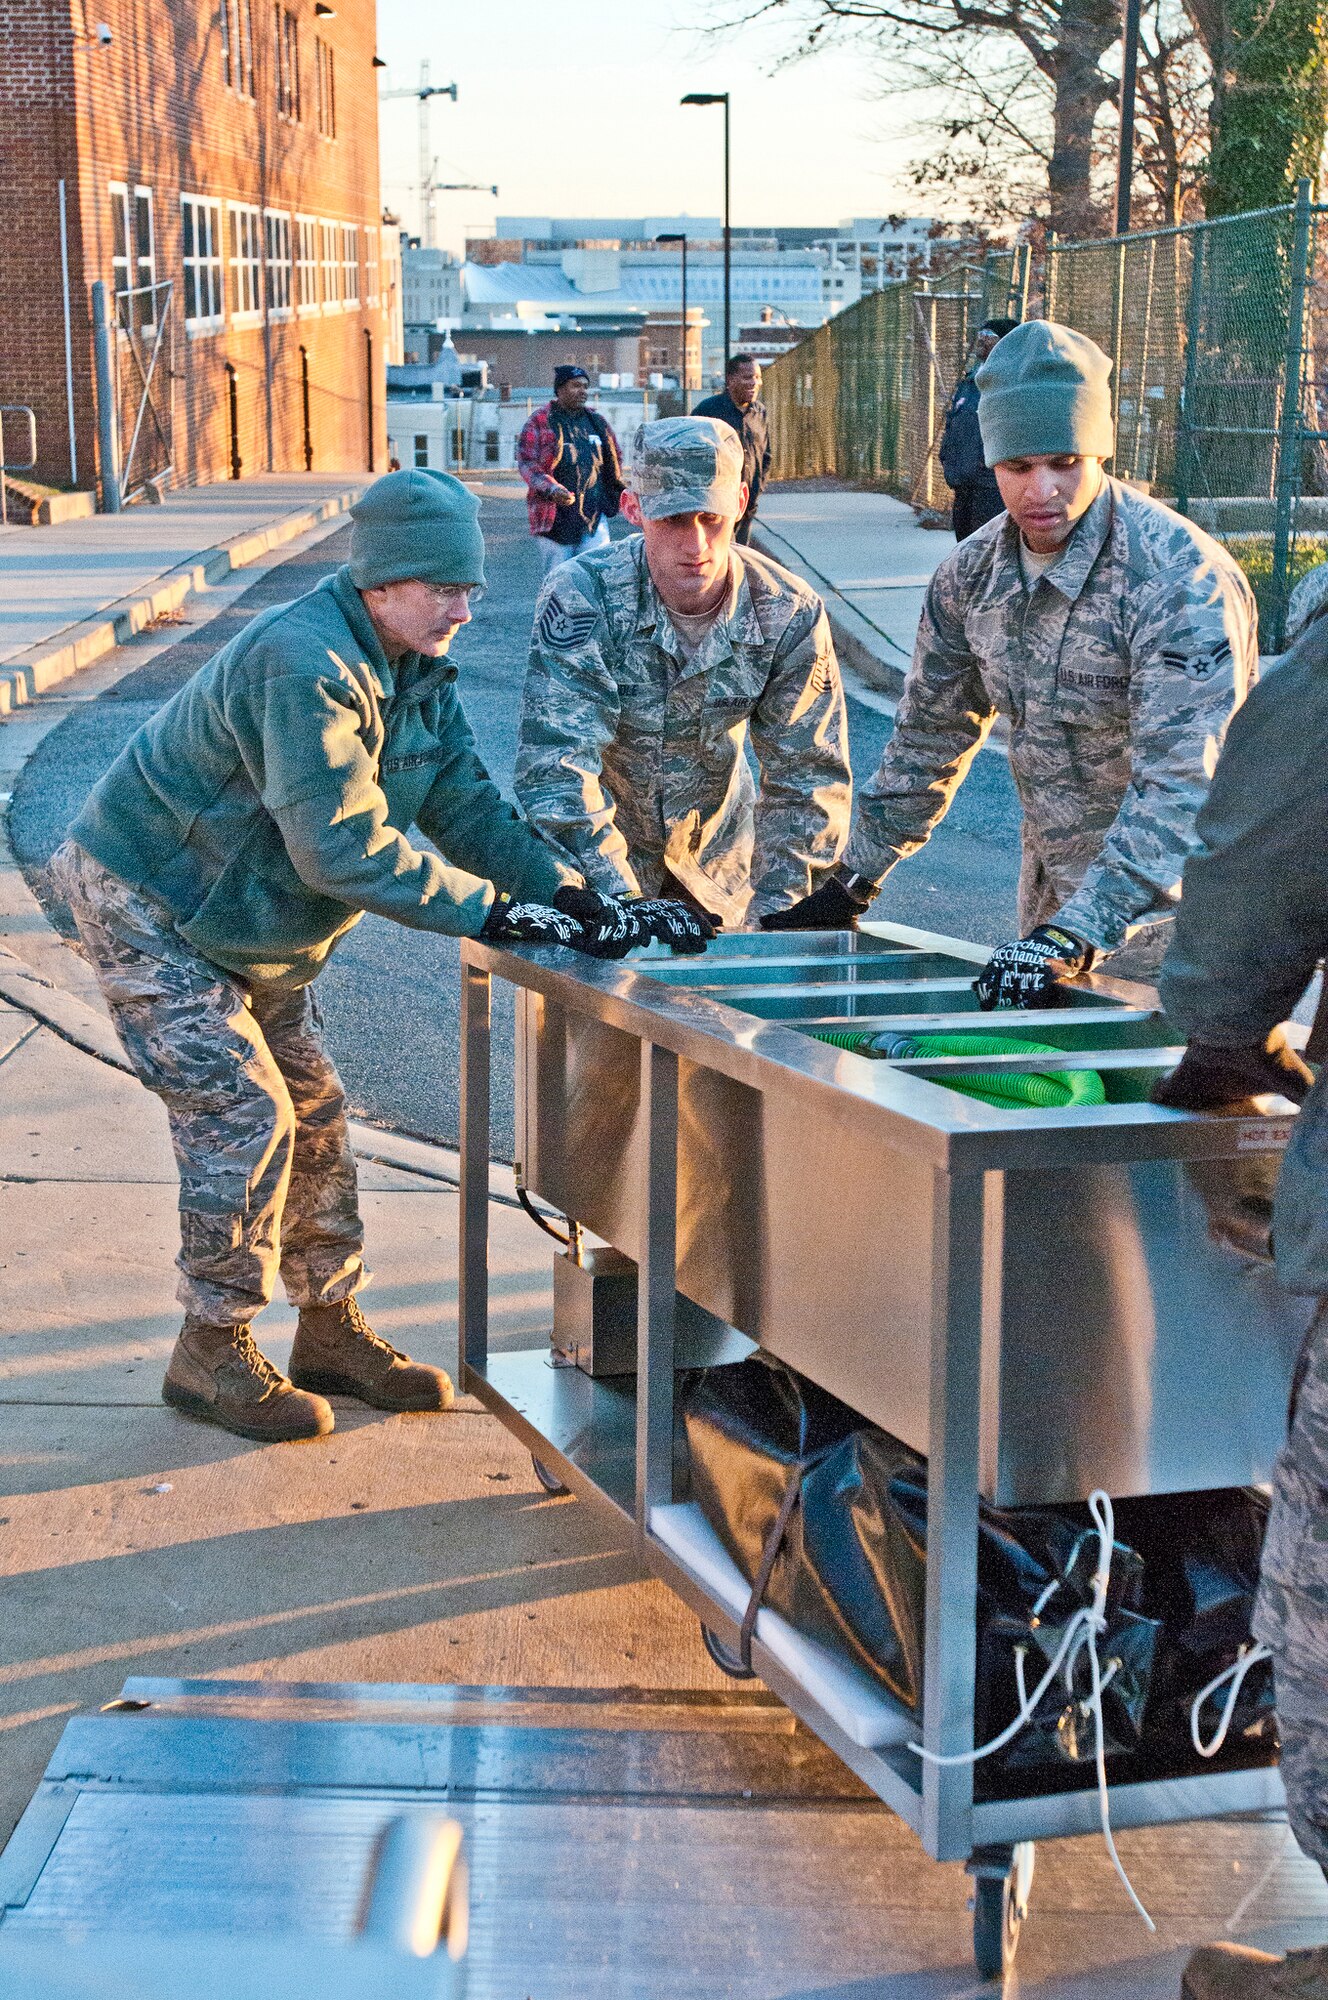 Members of the Kentucky Air National Guard’s 123rd Force Support Squadron unload kitchen equipment from a Disaster Relief Mobile Kitchen Trailer at McKinley Technology High School in Washington, D.C., on Jan. 19, 2013. They were among nine Kentucky Air Guardsmen who deployed to the nation’s capital to provide food and lodging for National Guard members supporting the inauguration of President Barack Obama. (Kentucky Air National Guard photo by Senior Airman Vicky Spesard)